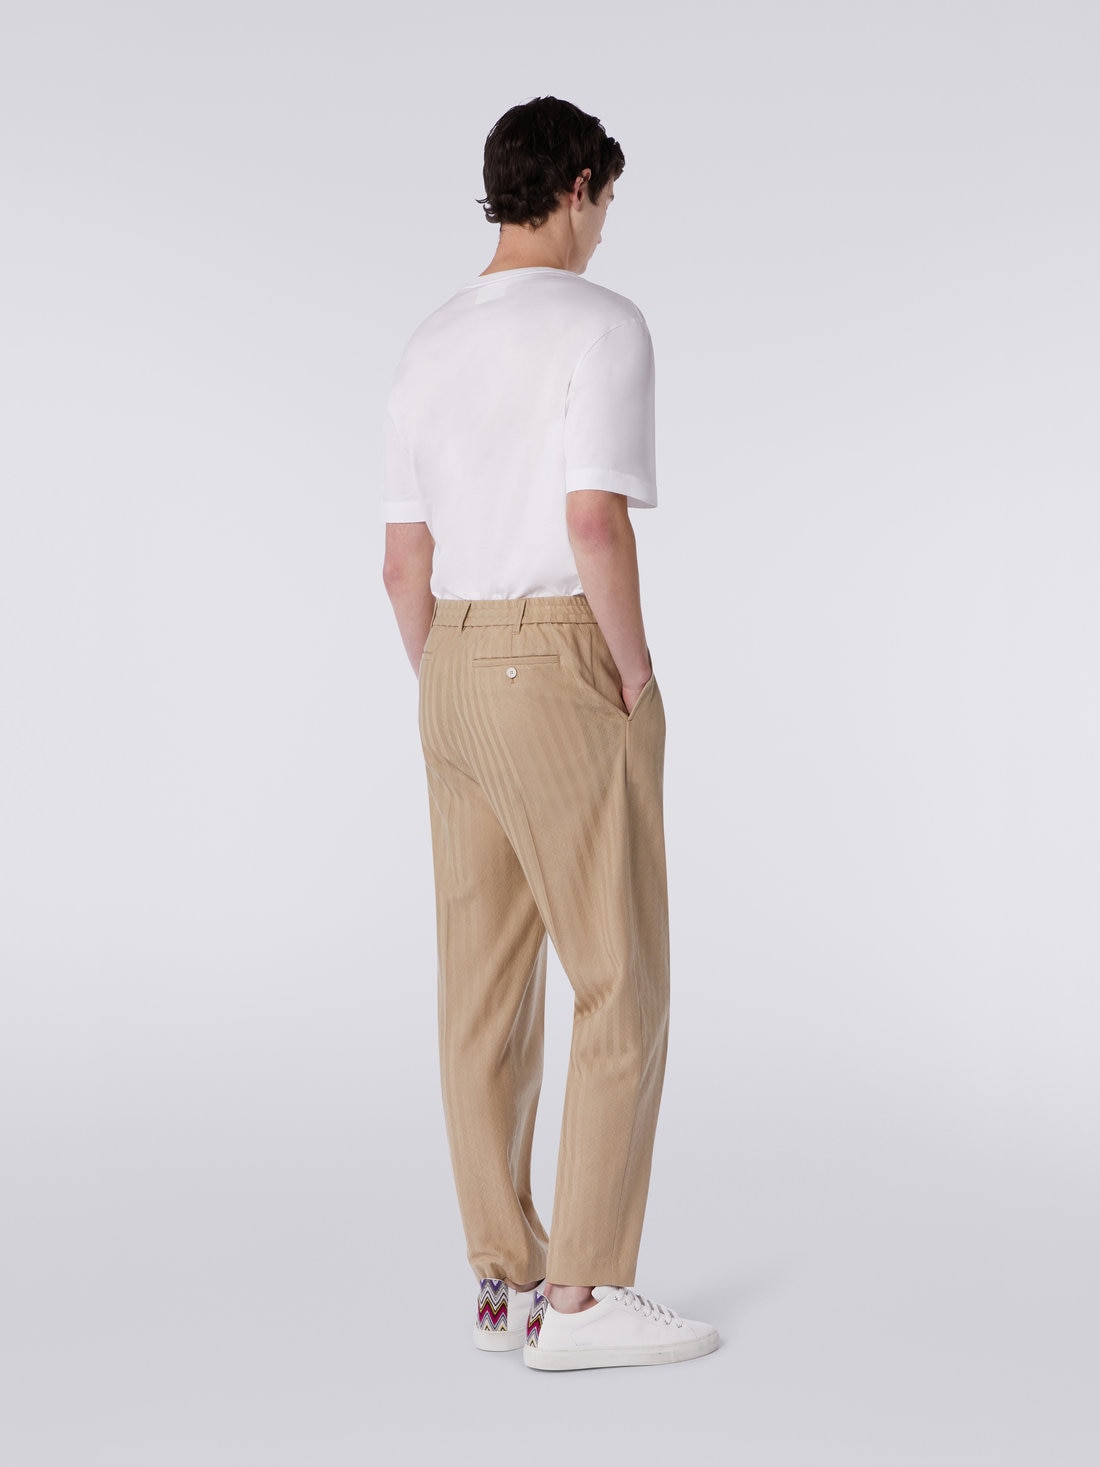 Viscose and cotton chevron trousers with ironed crease, White  - US23SI00BR00L051307 - 3